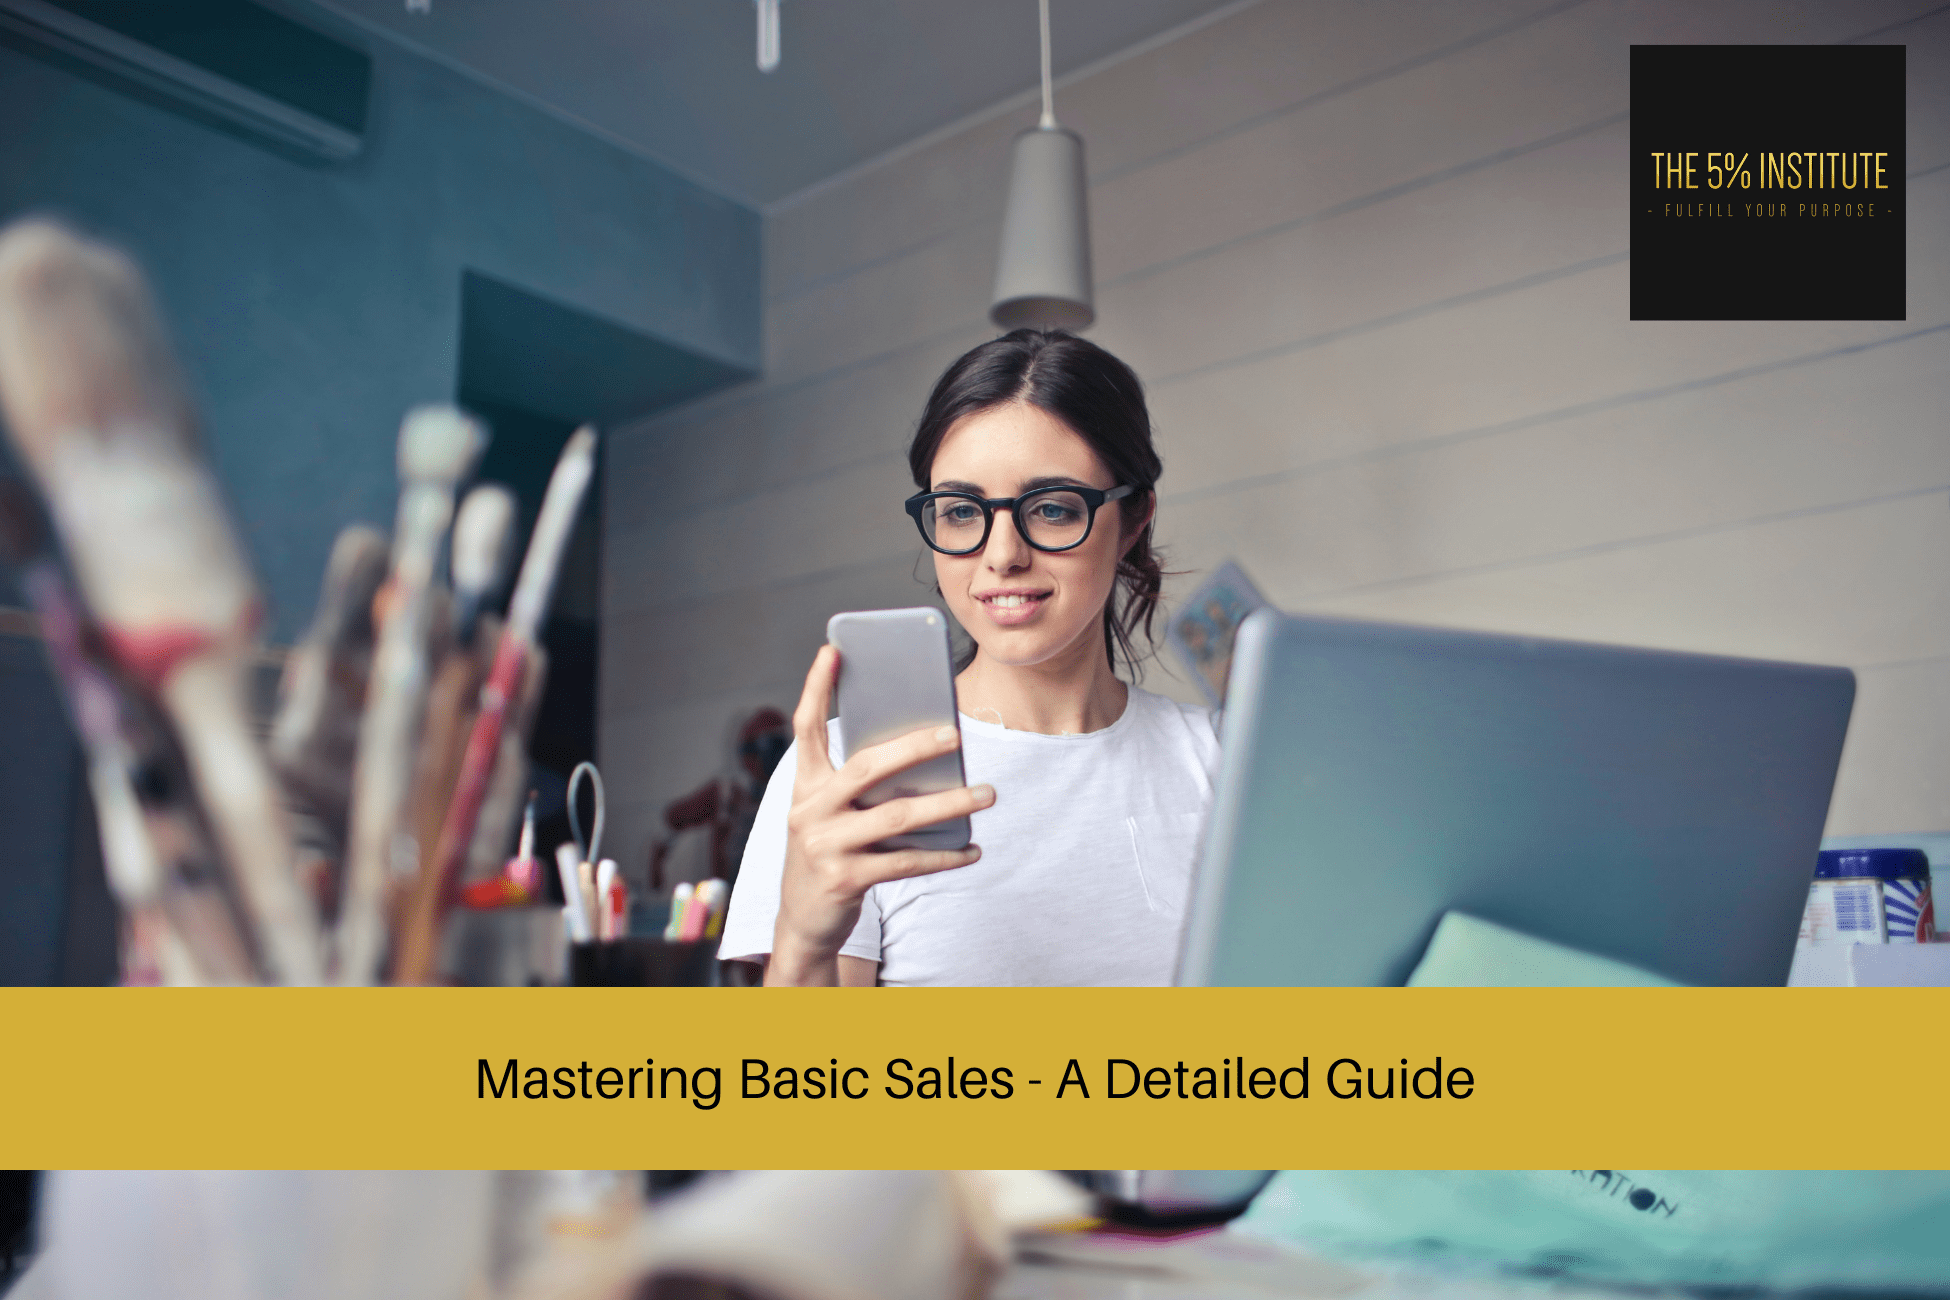 Mastering Basic Sales - A Detailed Guide